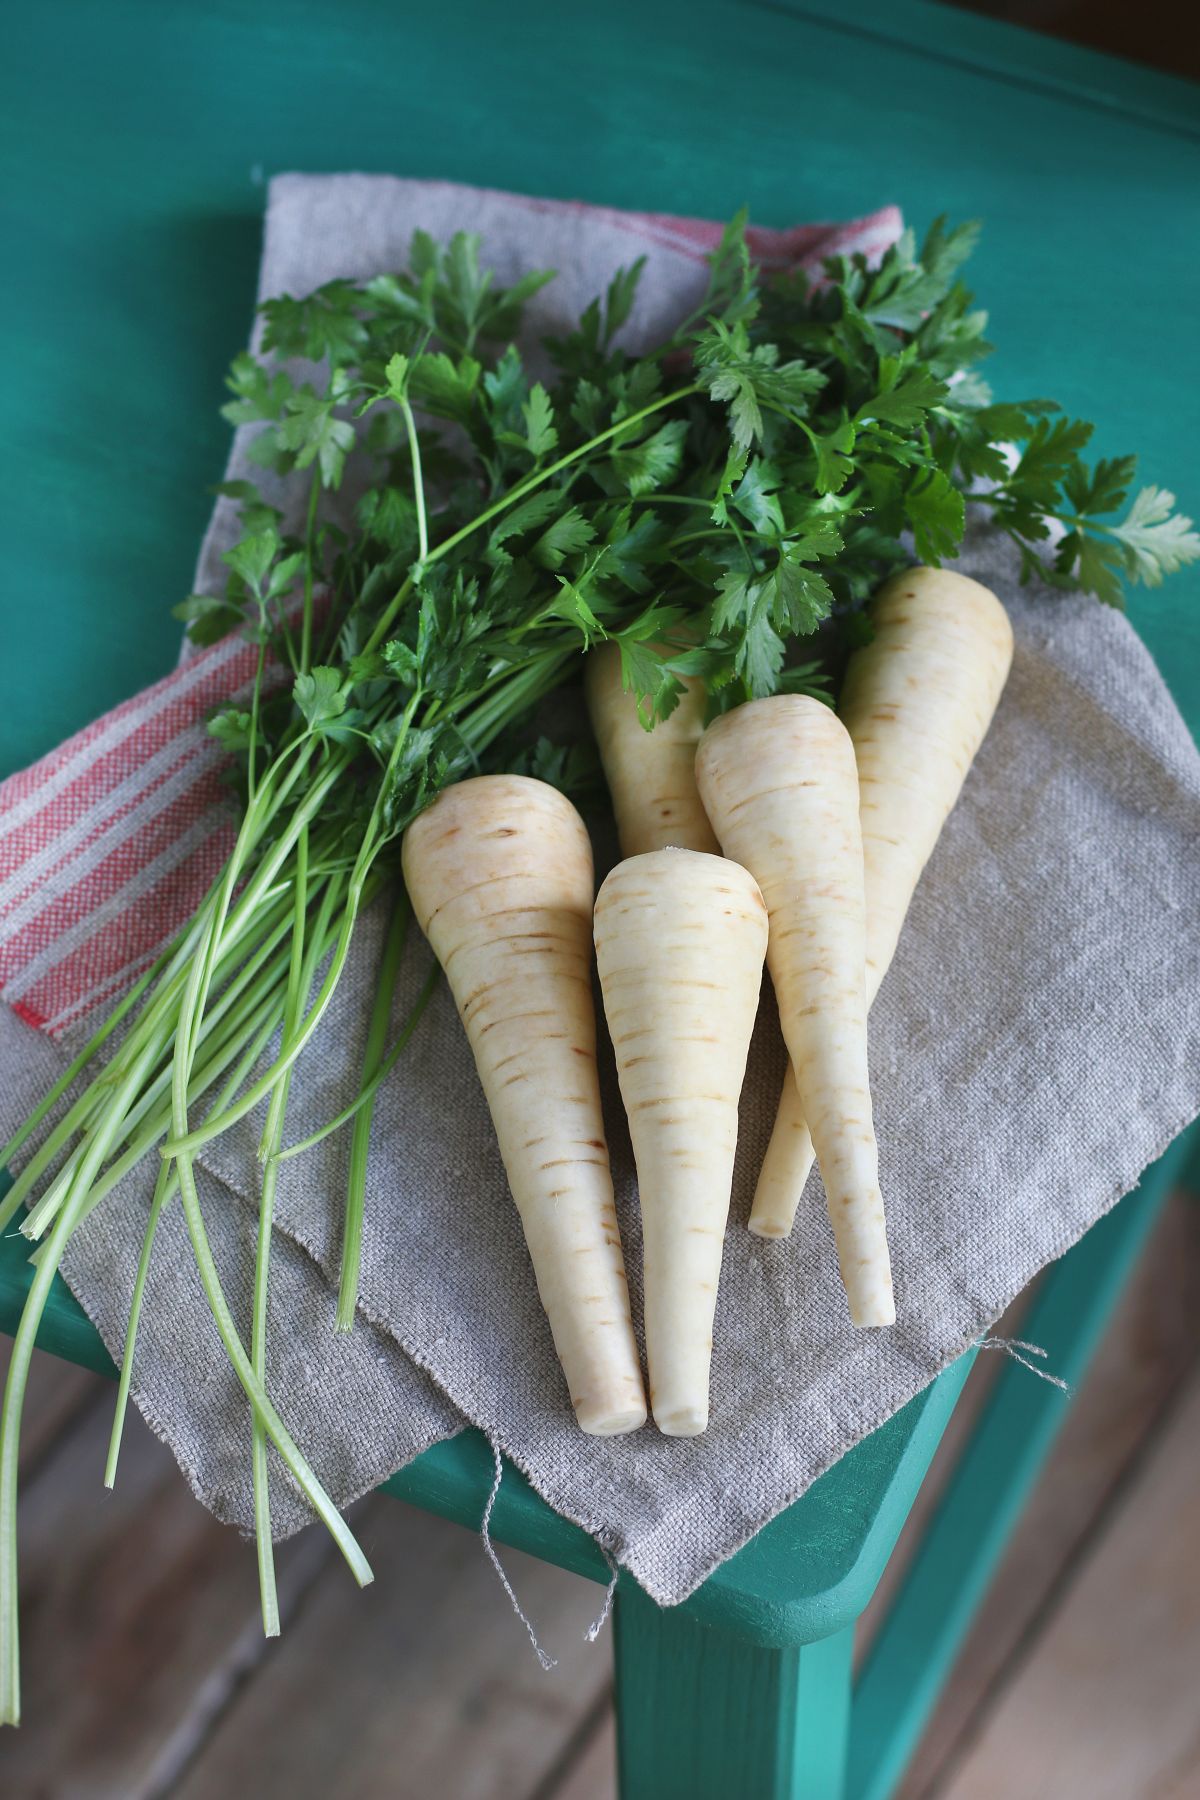 Fresh parsnips on green wooden chair